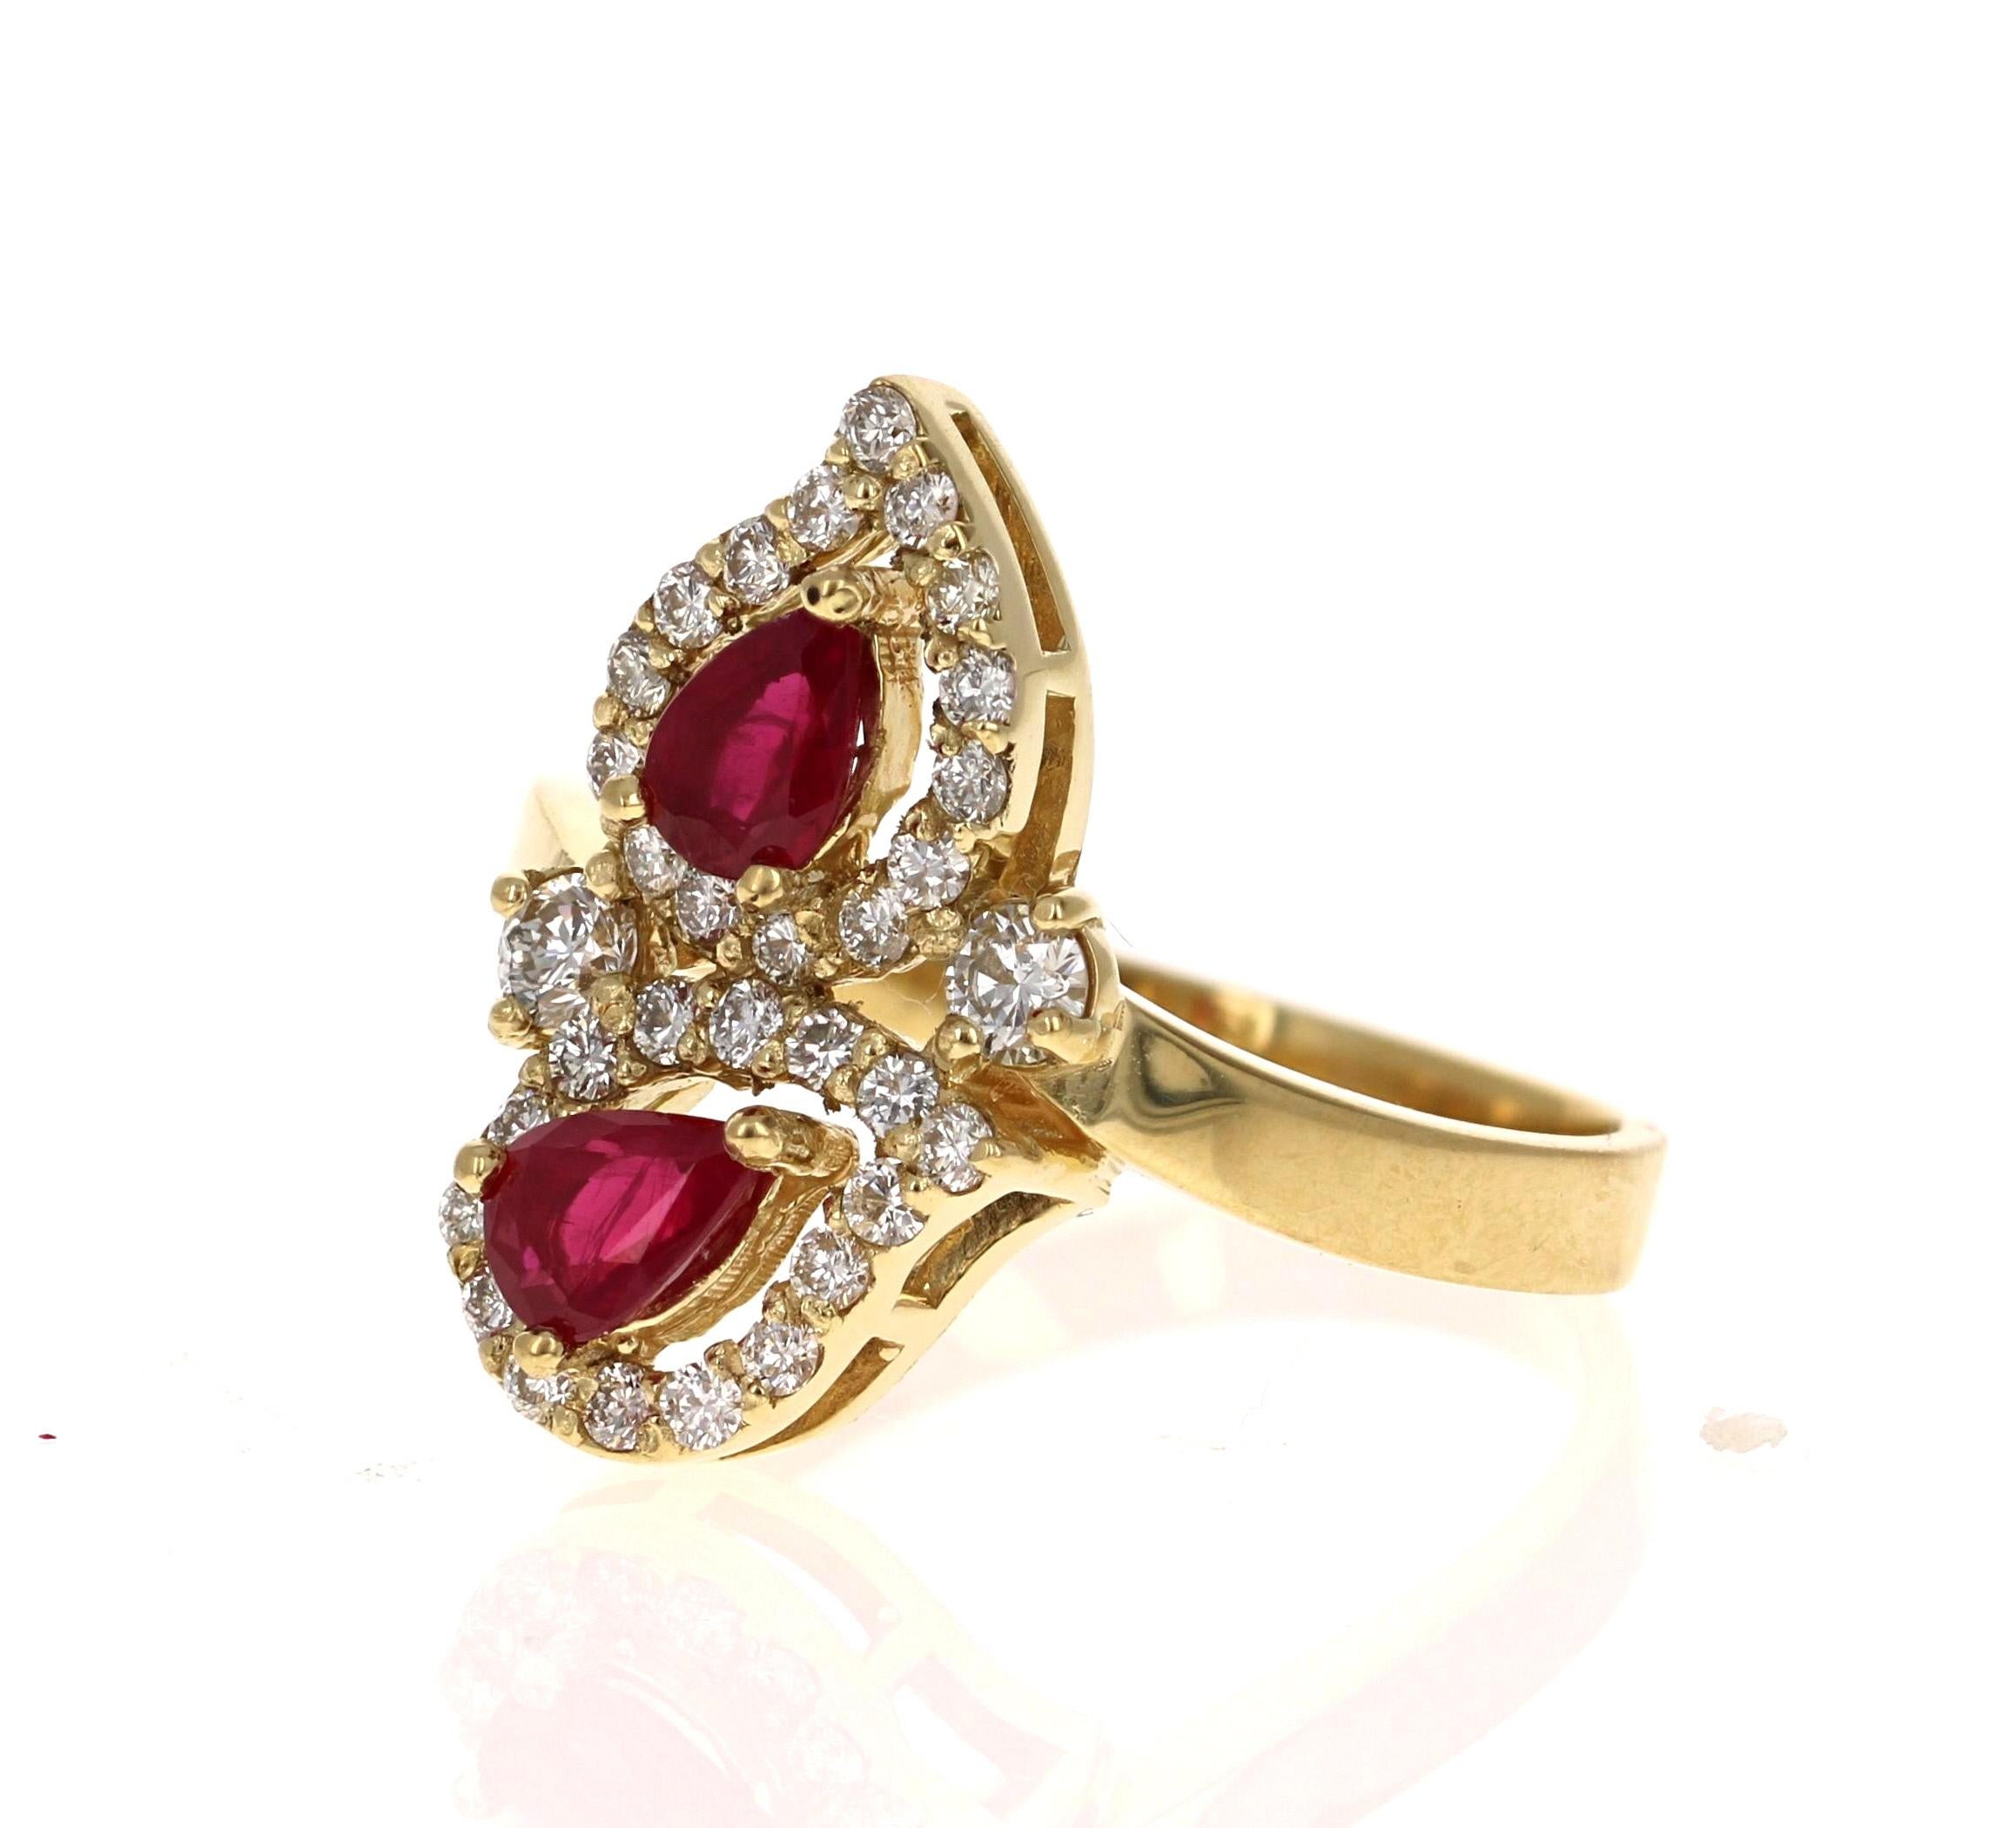 Simply beautiful Ruby Diamond Ring with 2 Pear Cut Burmese Rubies that weigh 0.73 Carats.   There are 32 Round Cut Diamonds that weigh 0.51 Carats. The total carat weight of the ring is 1.24 Carats. The clarity and color of the diamonds are VS2-H.